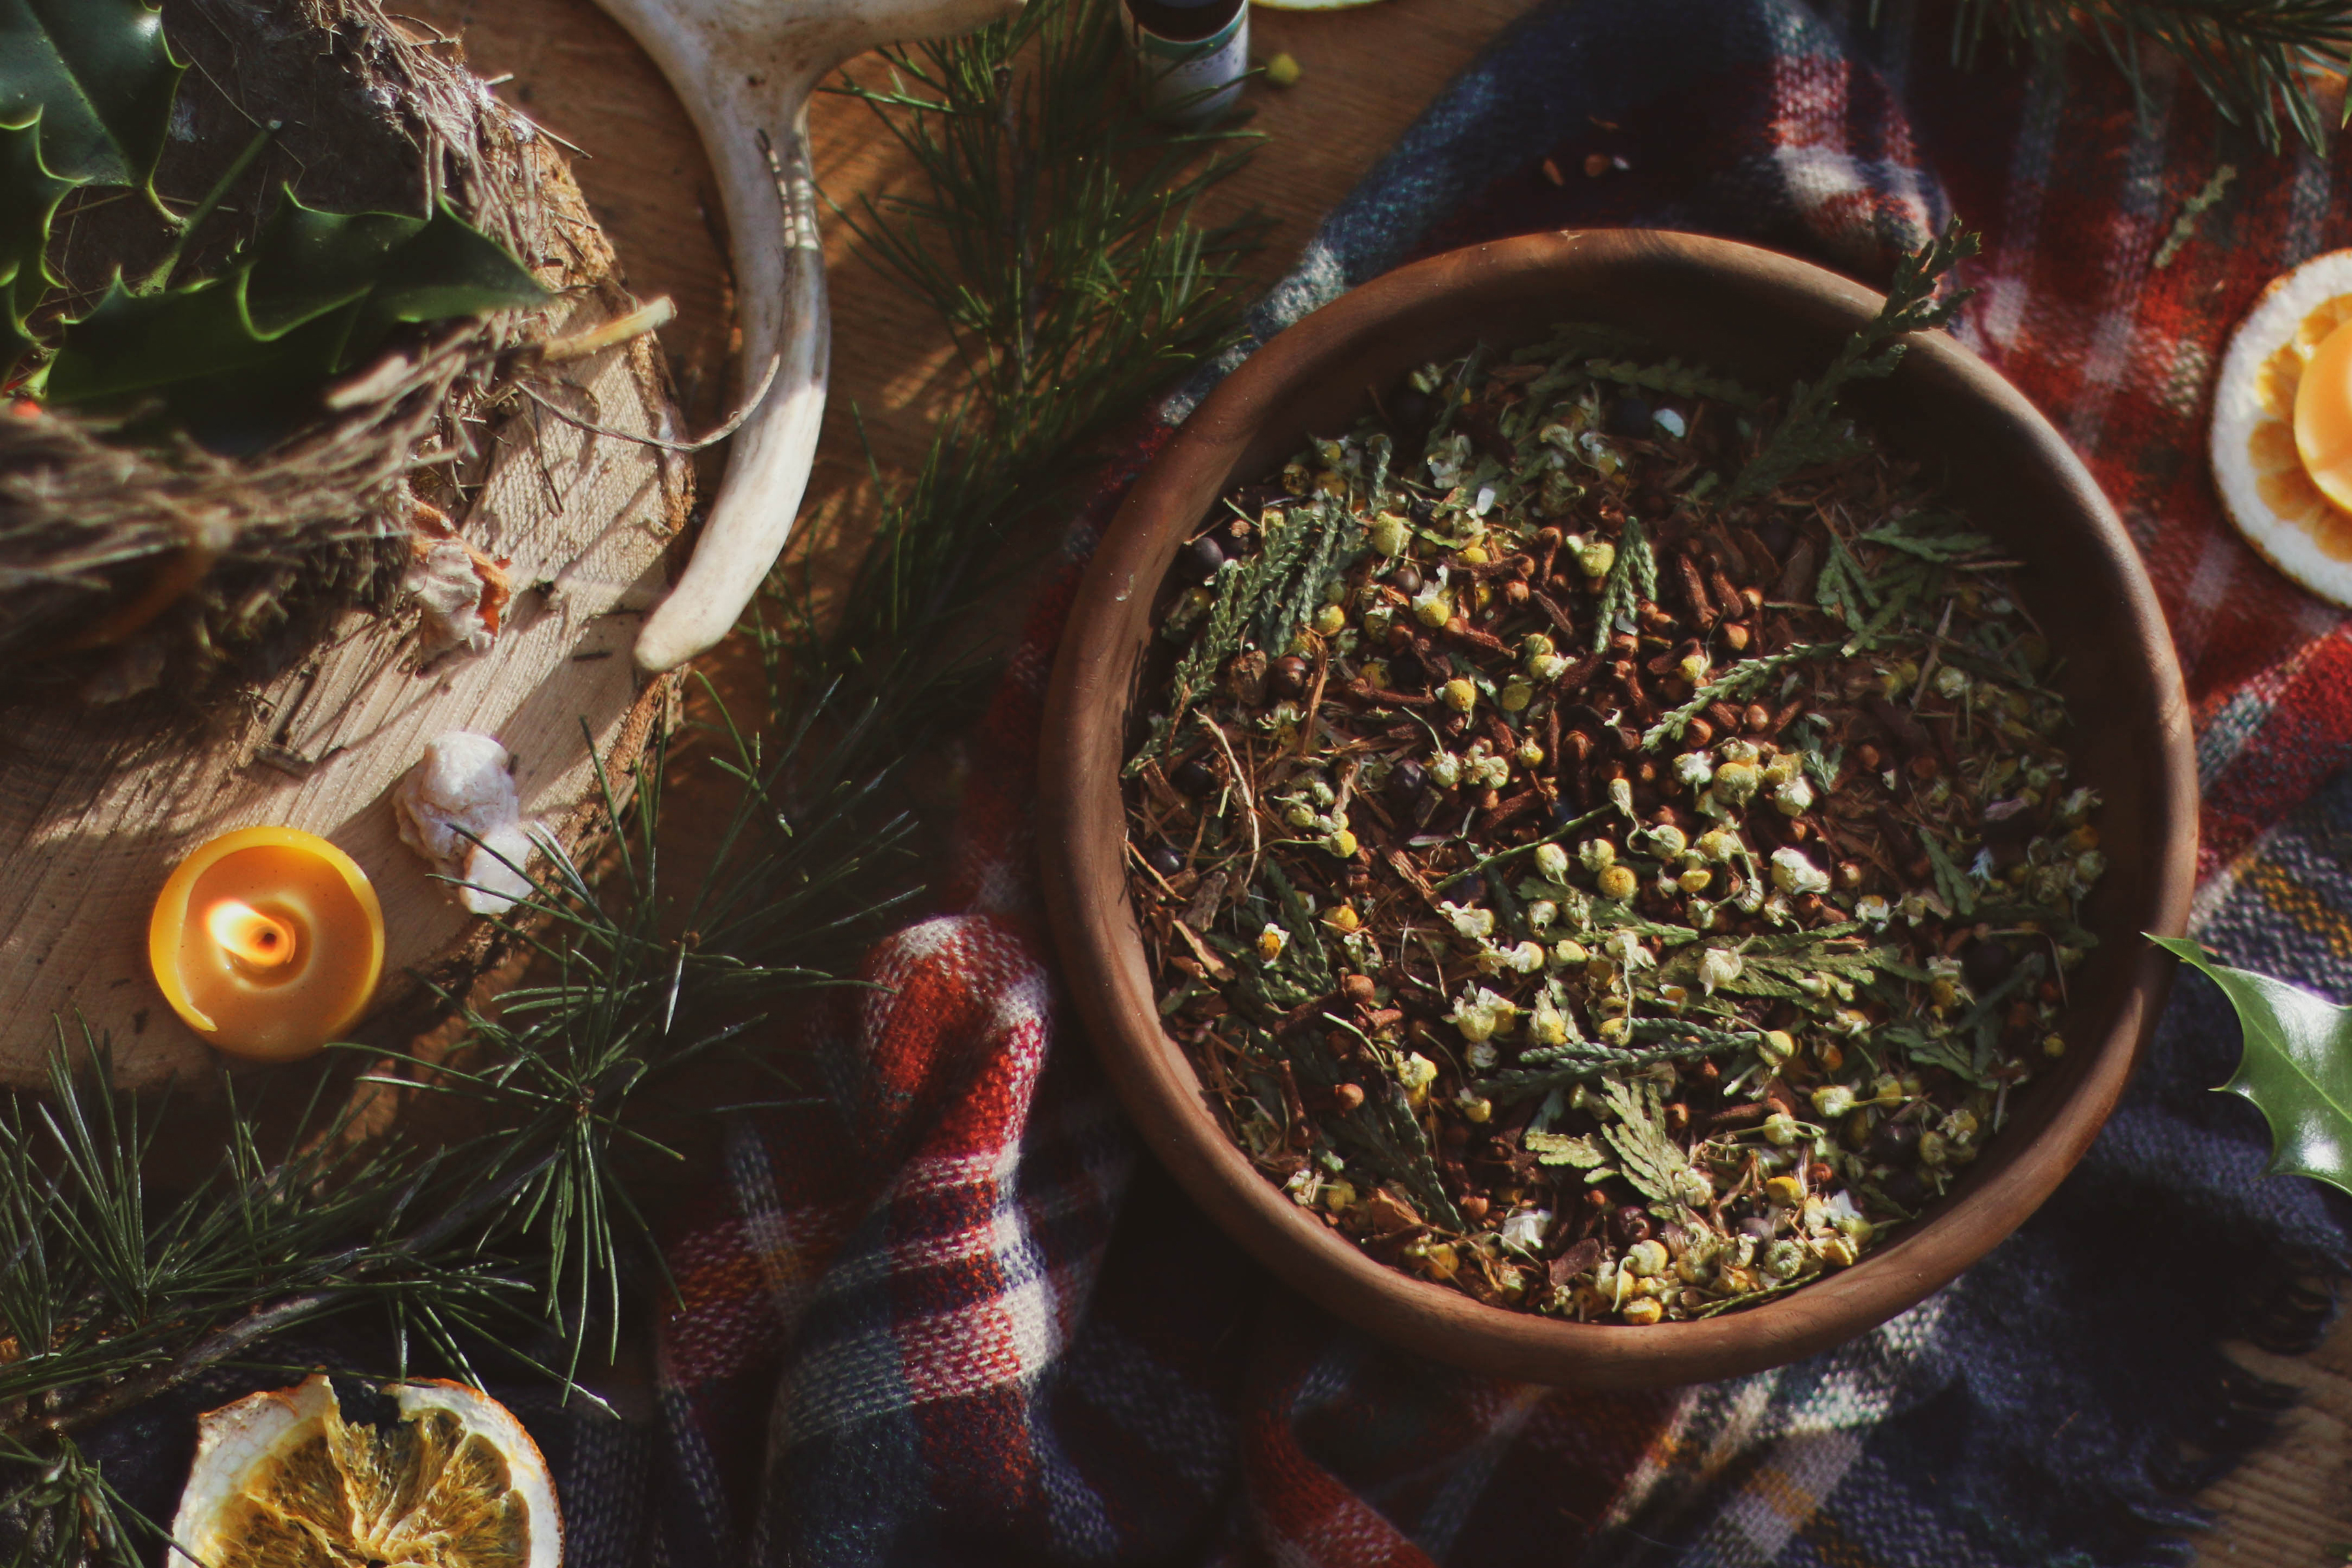 wooden-bowl-of-herbal-potpourri-blend-with-evergreens-and-yule-decorations